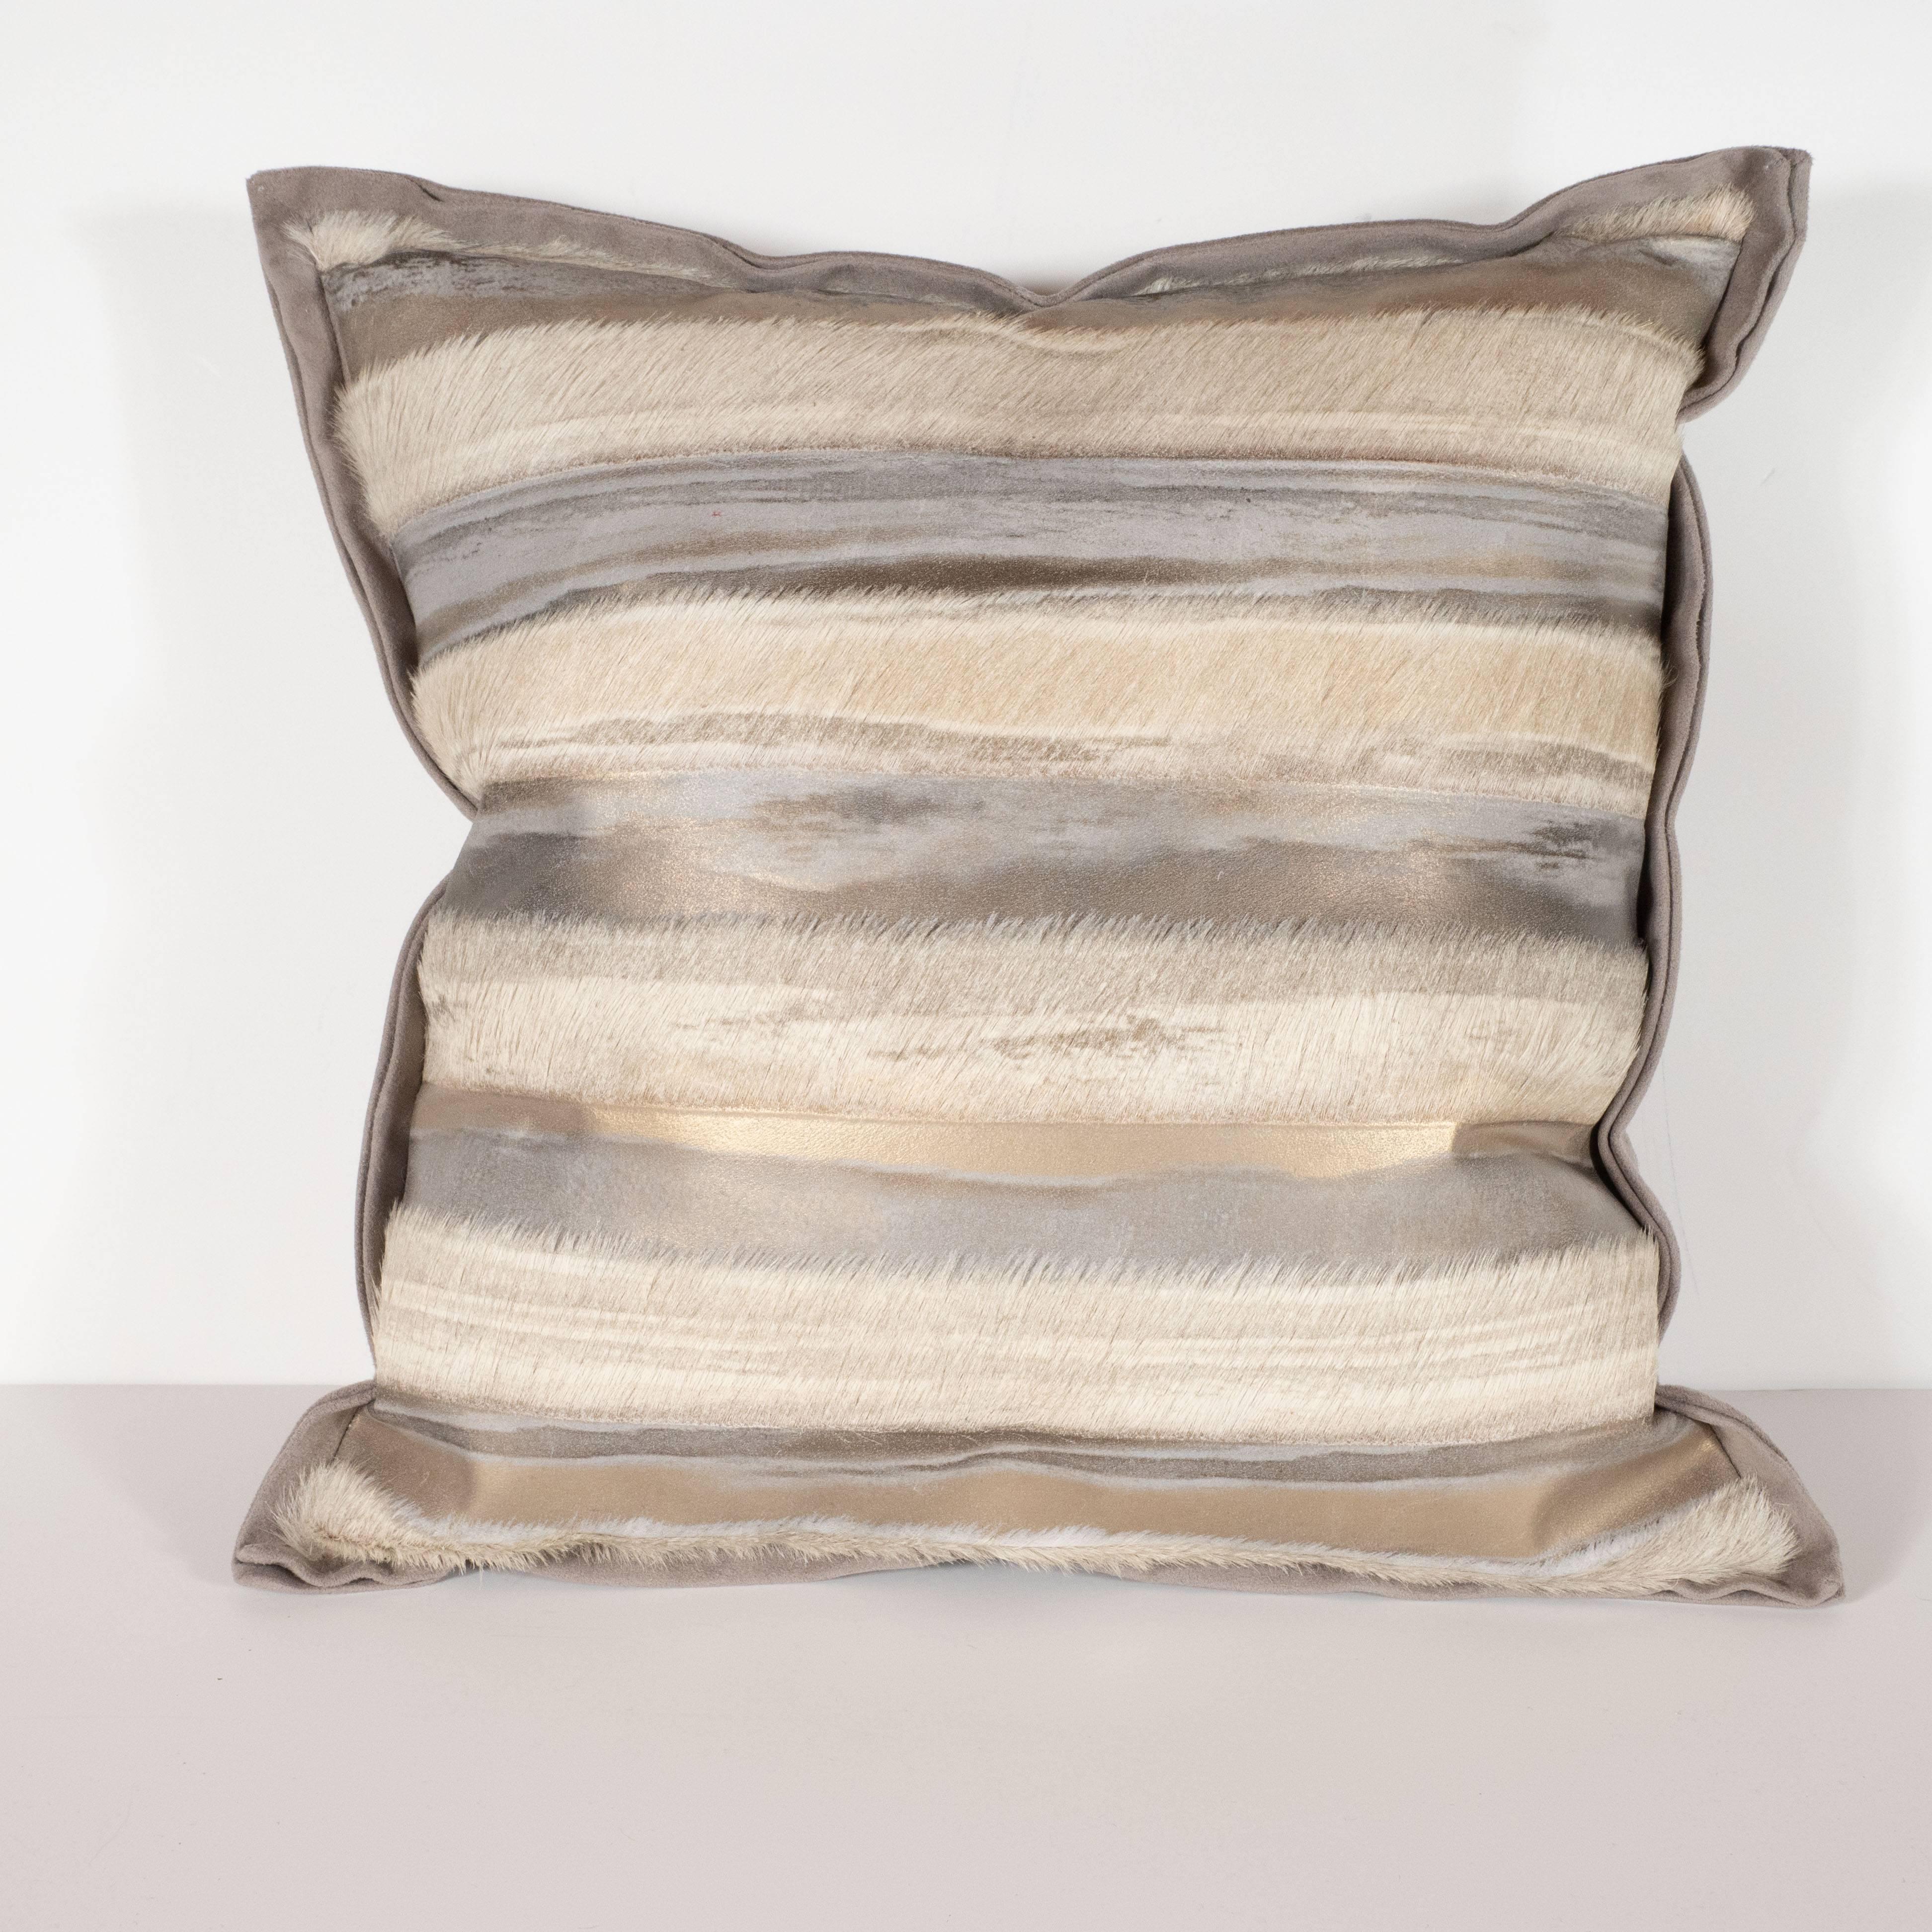 This sophisticated pair of hand-crafted modernist pillows were custom made by artisans in New York State. They feature alternating bands of off-white horsehide and iridescent lavender with yellow gold and antique pewter accents as well as a dove